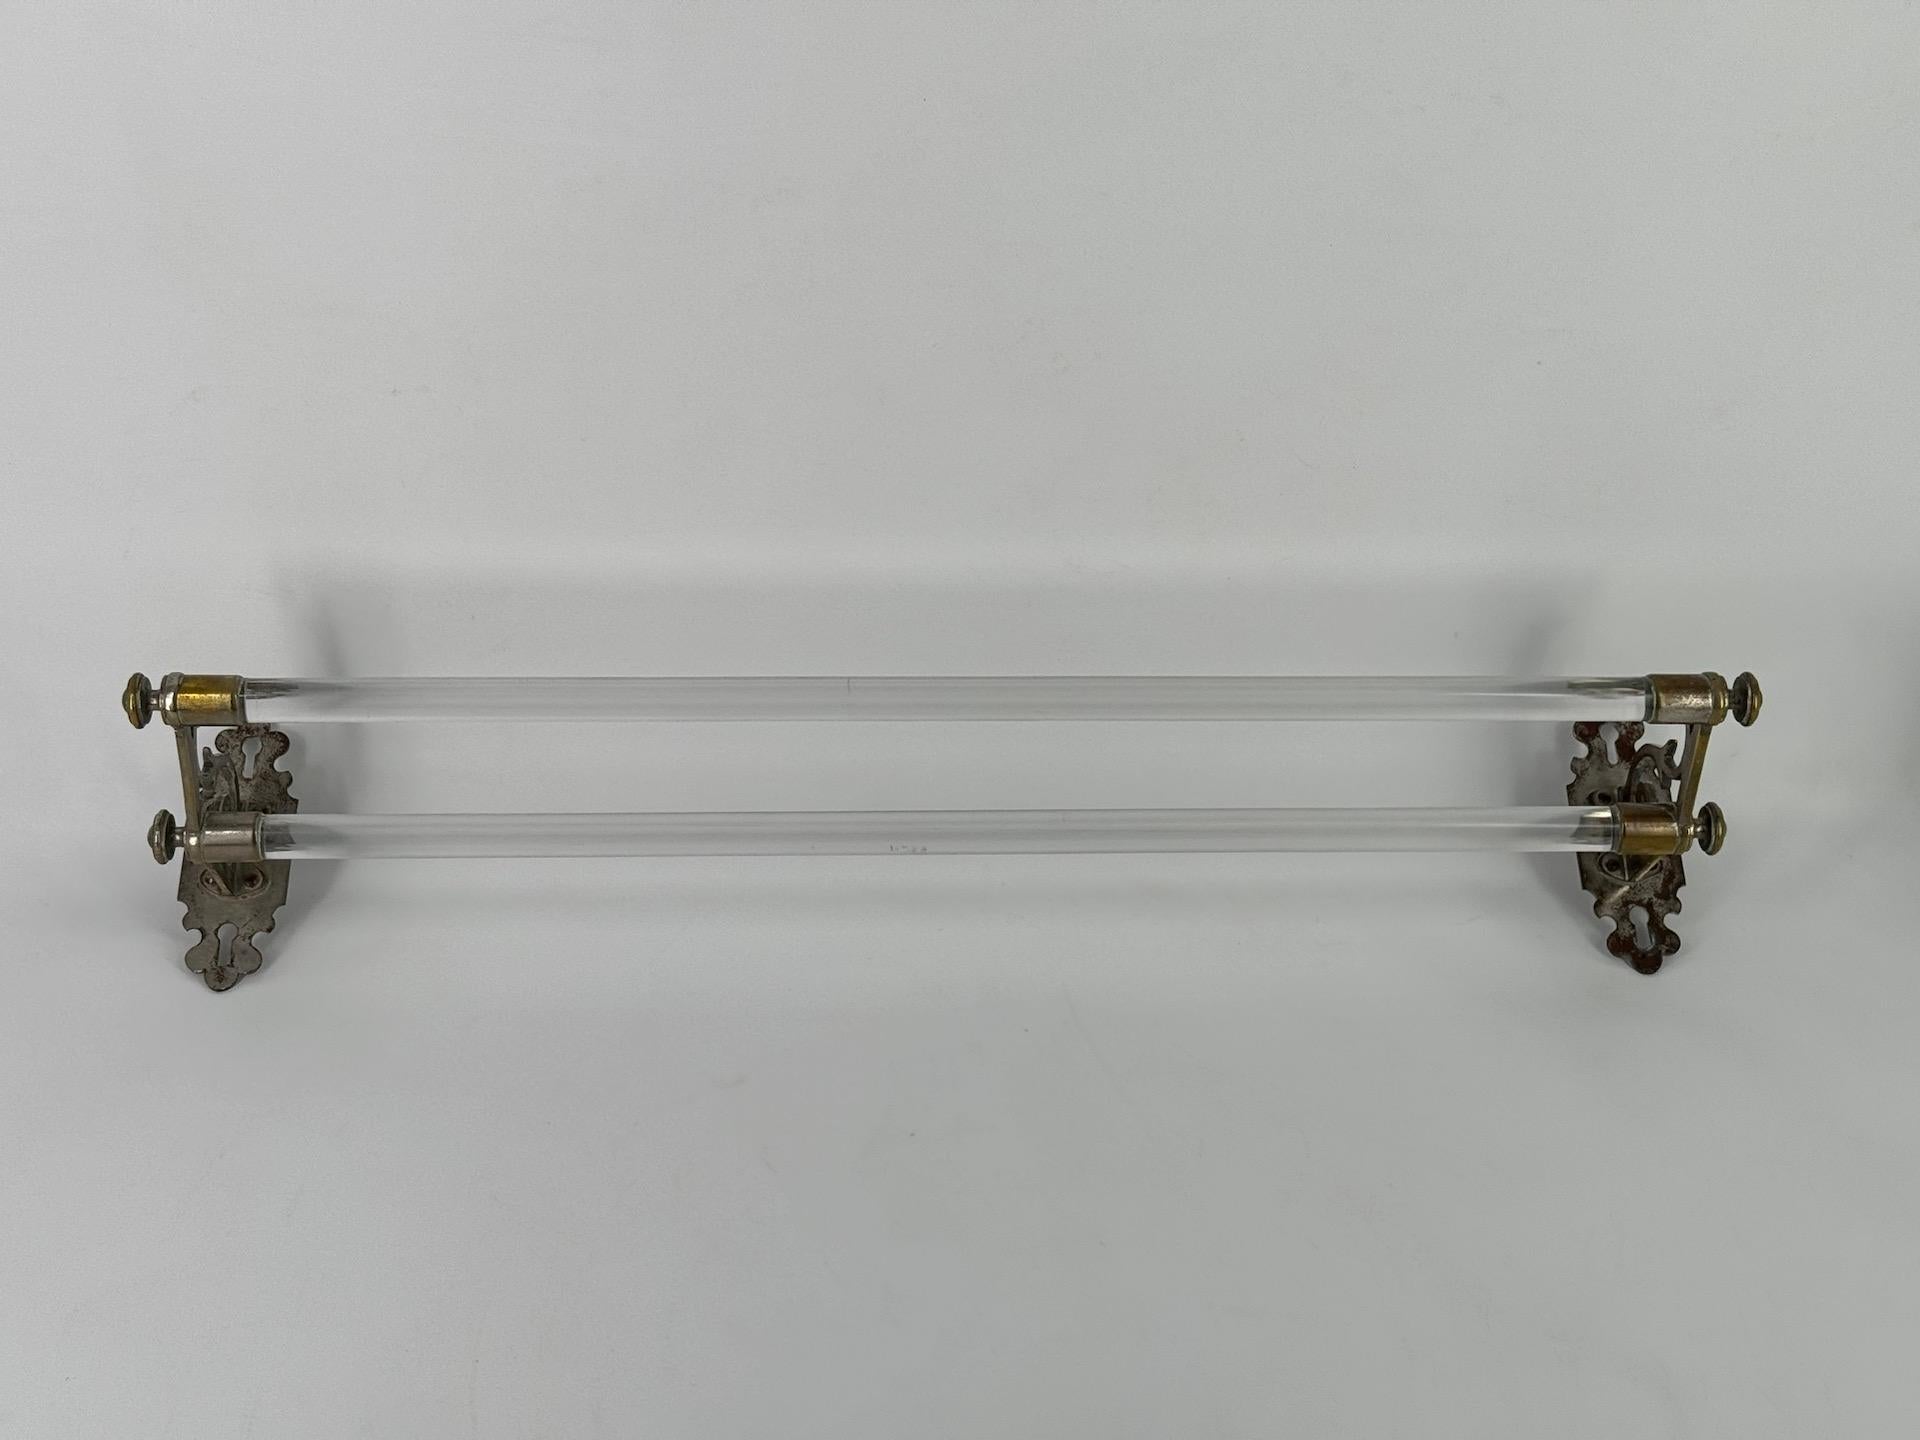 Antique French Glass and Nickelled brass Double Towel Rail 1900 Art Nouveau For Sale 7